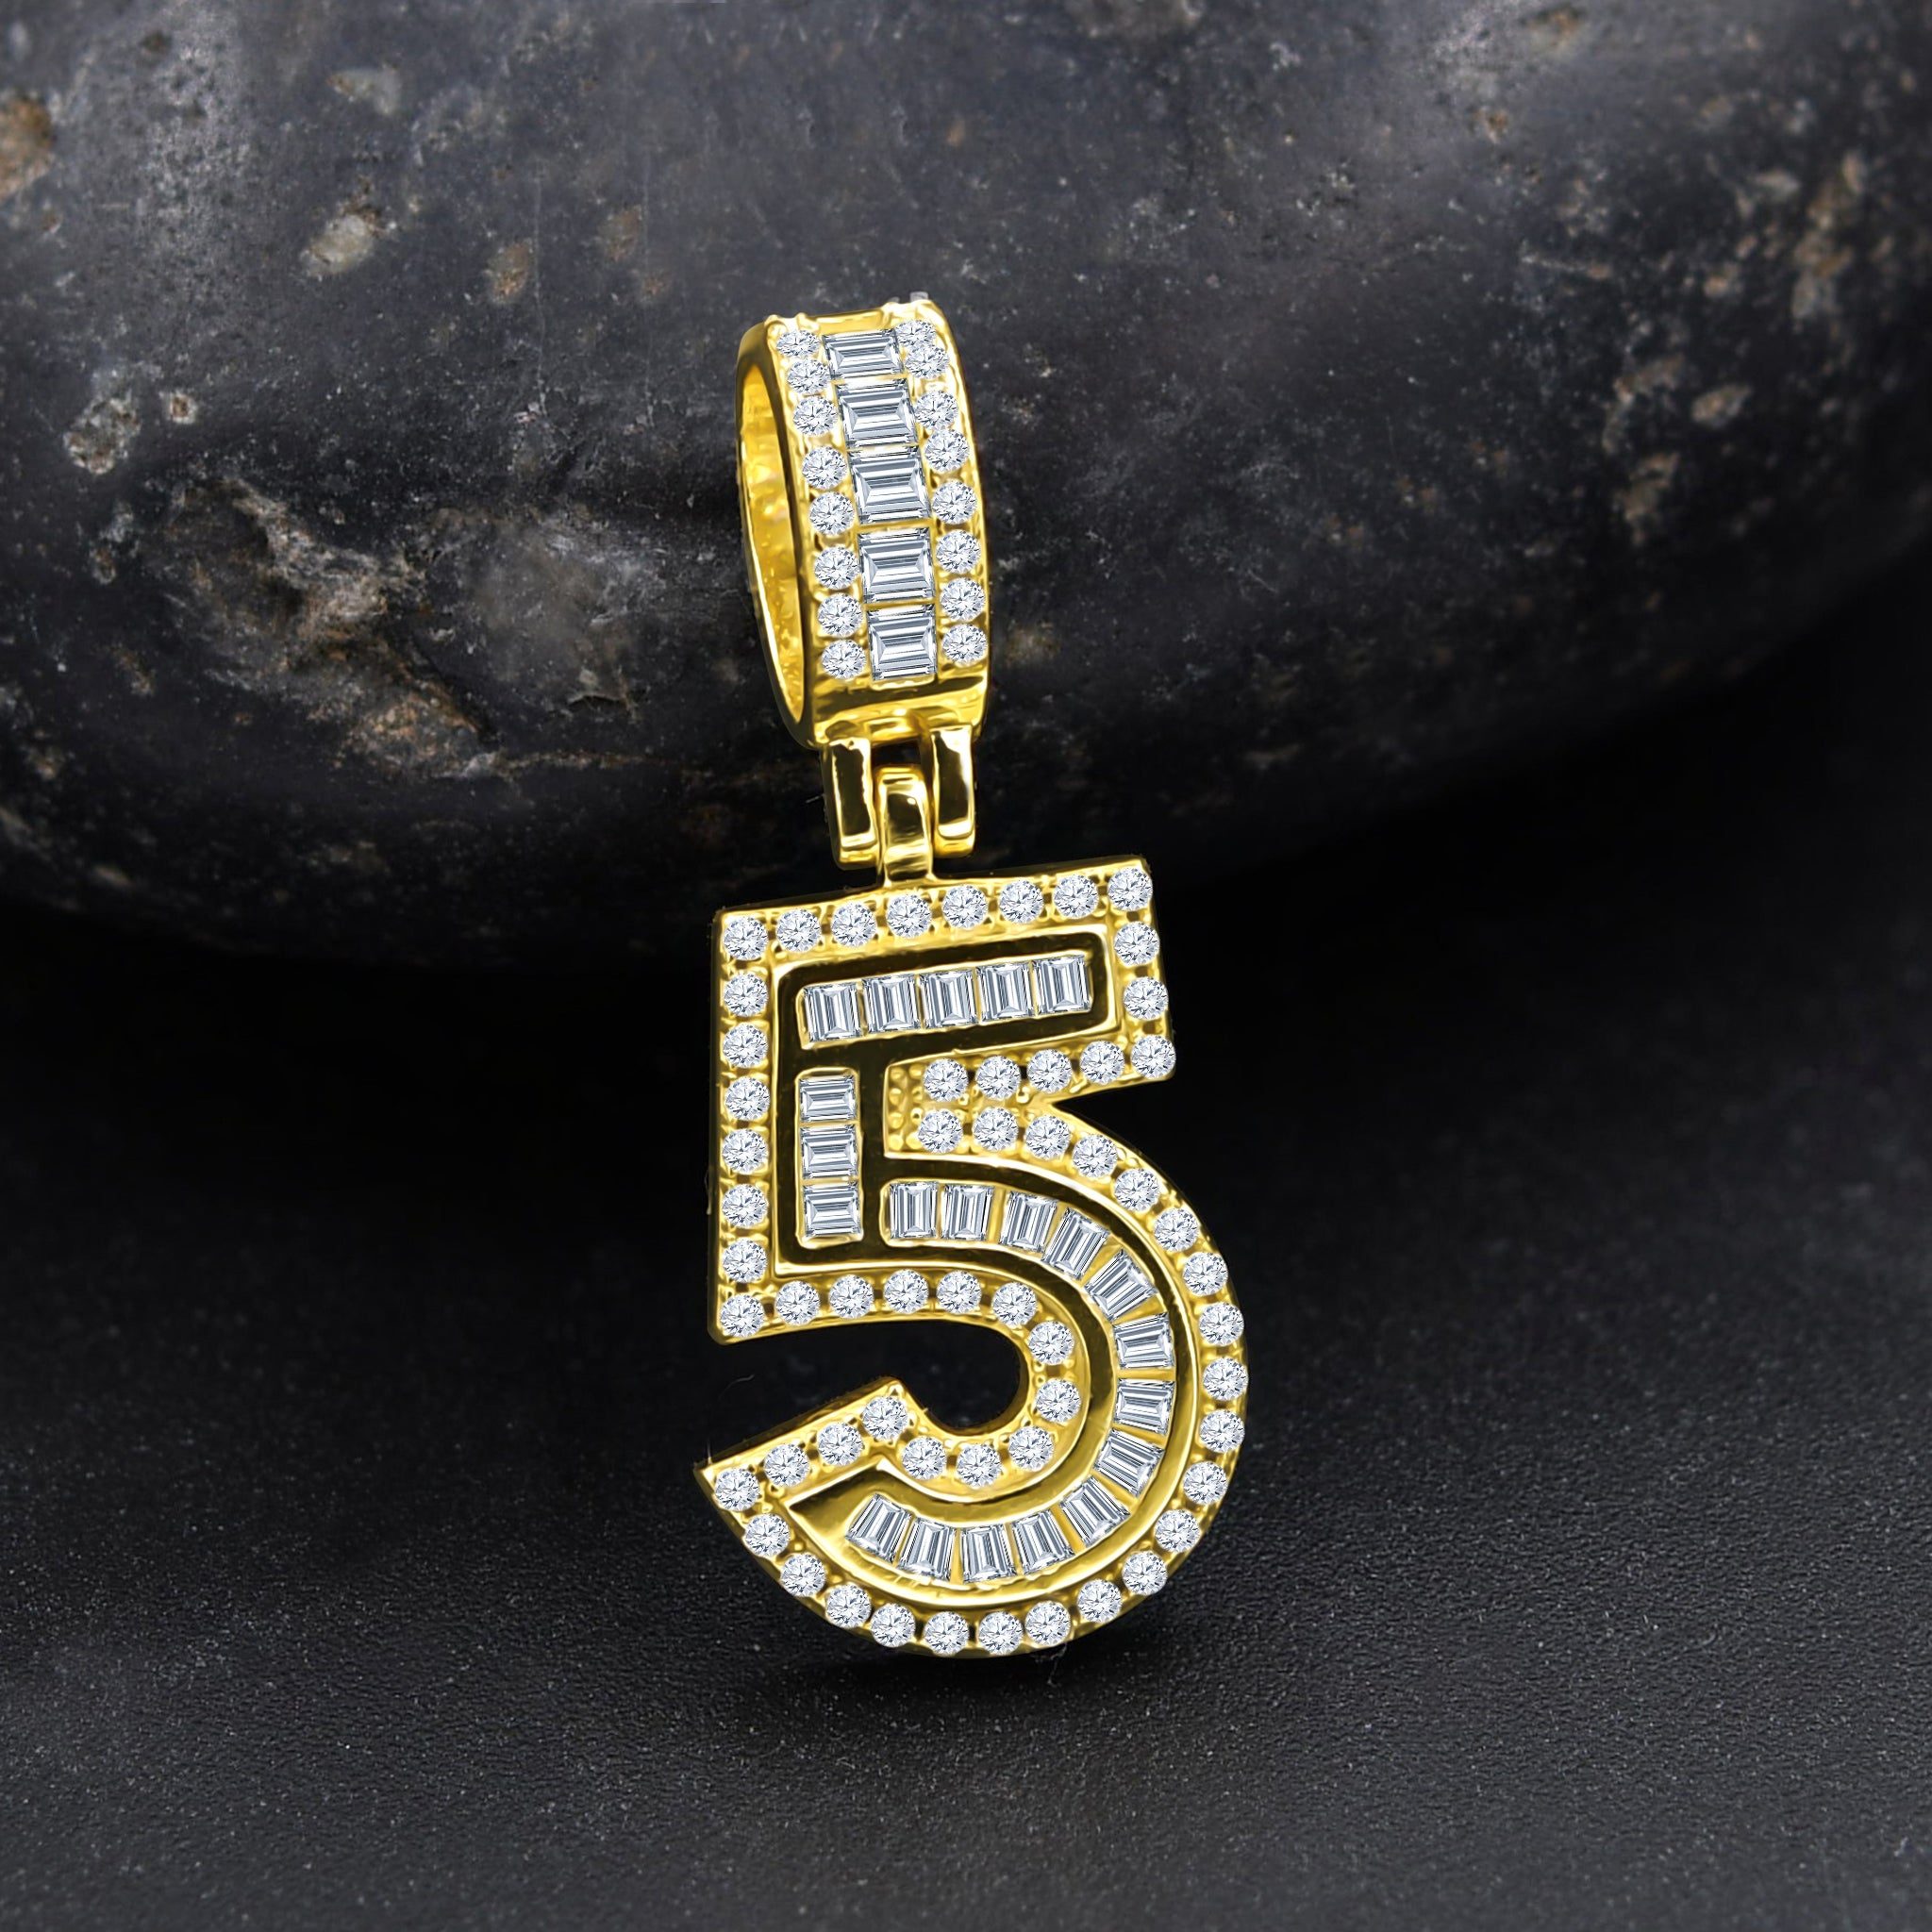 CIPHER STERLING SILVER (NUMERIC) PENDANT WITH CZ I 9218401